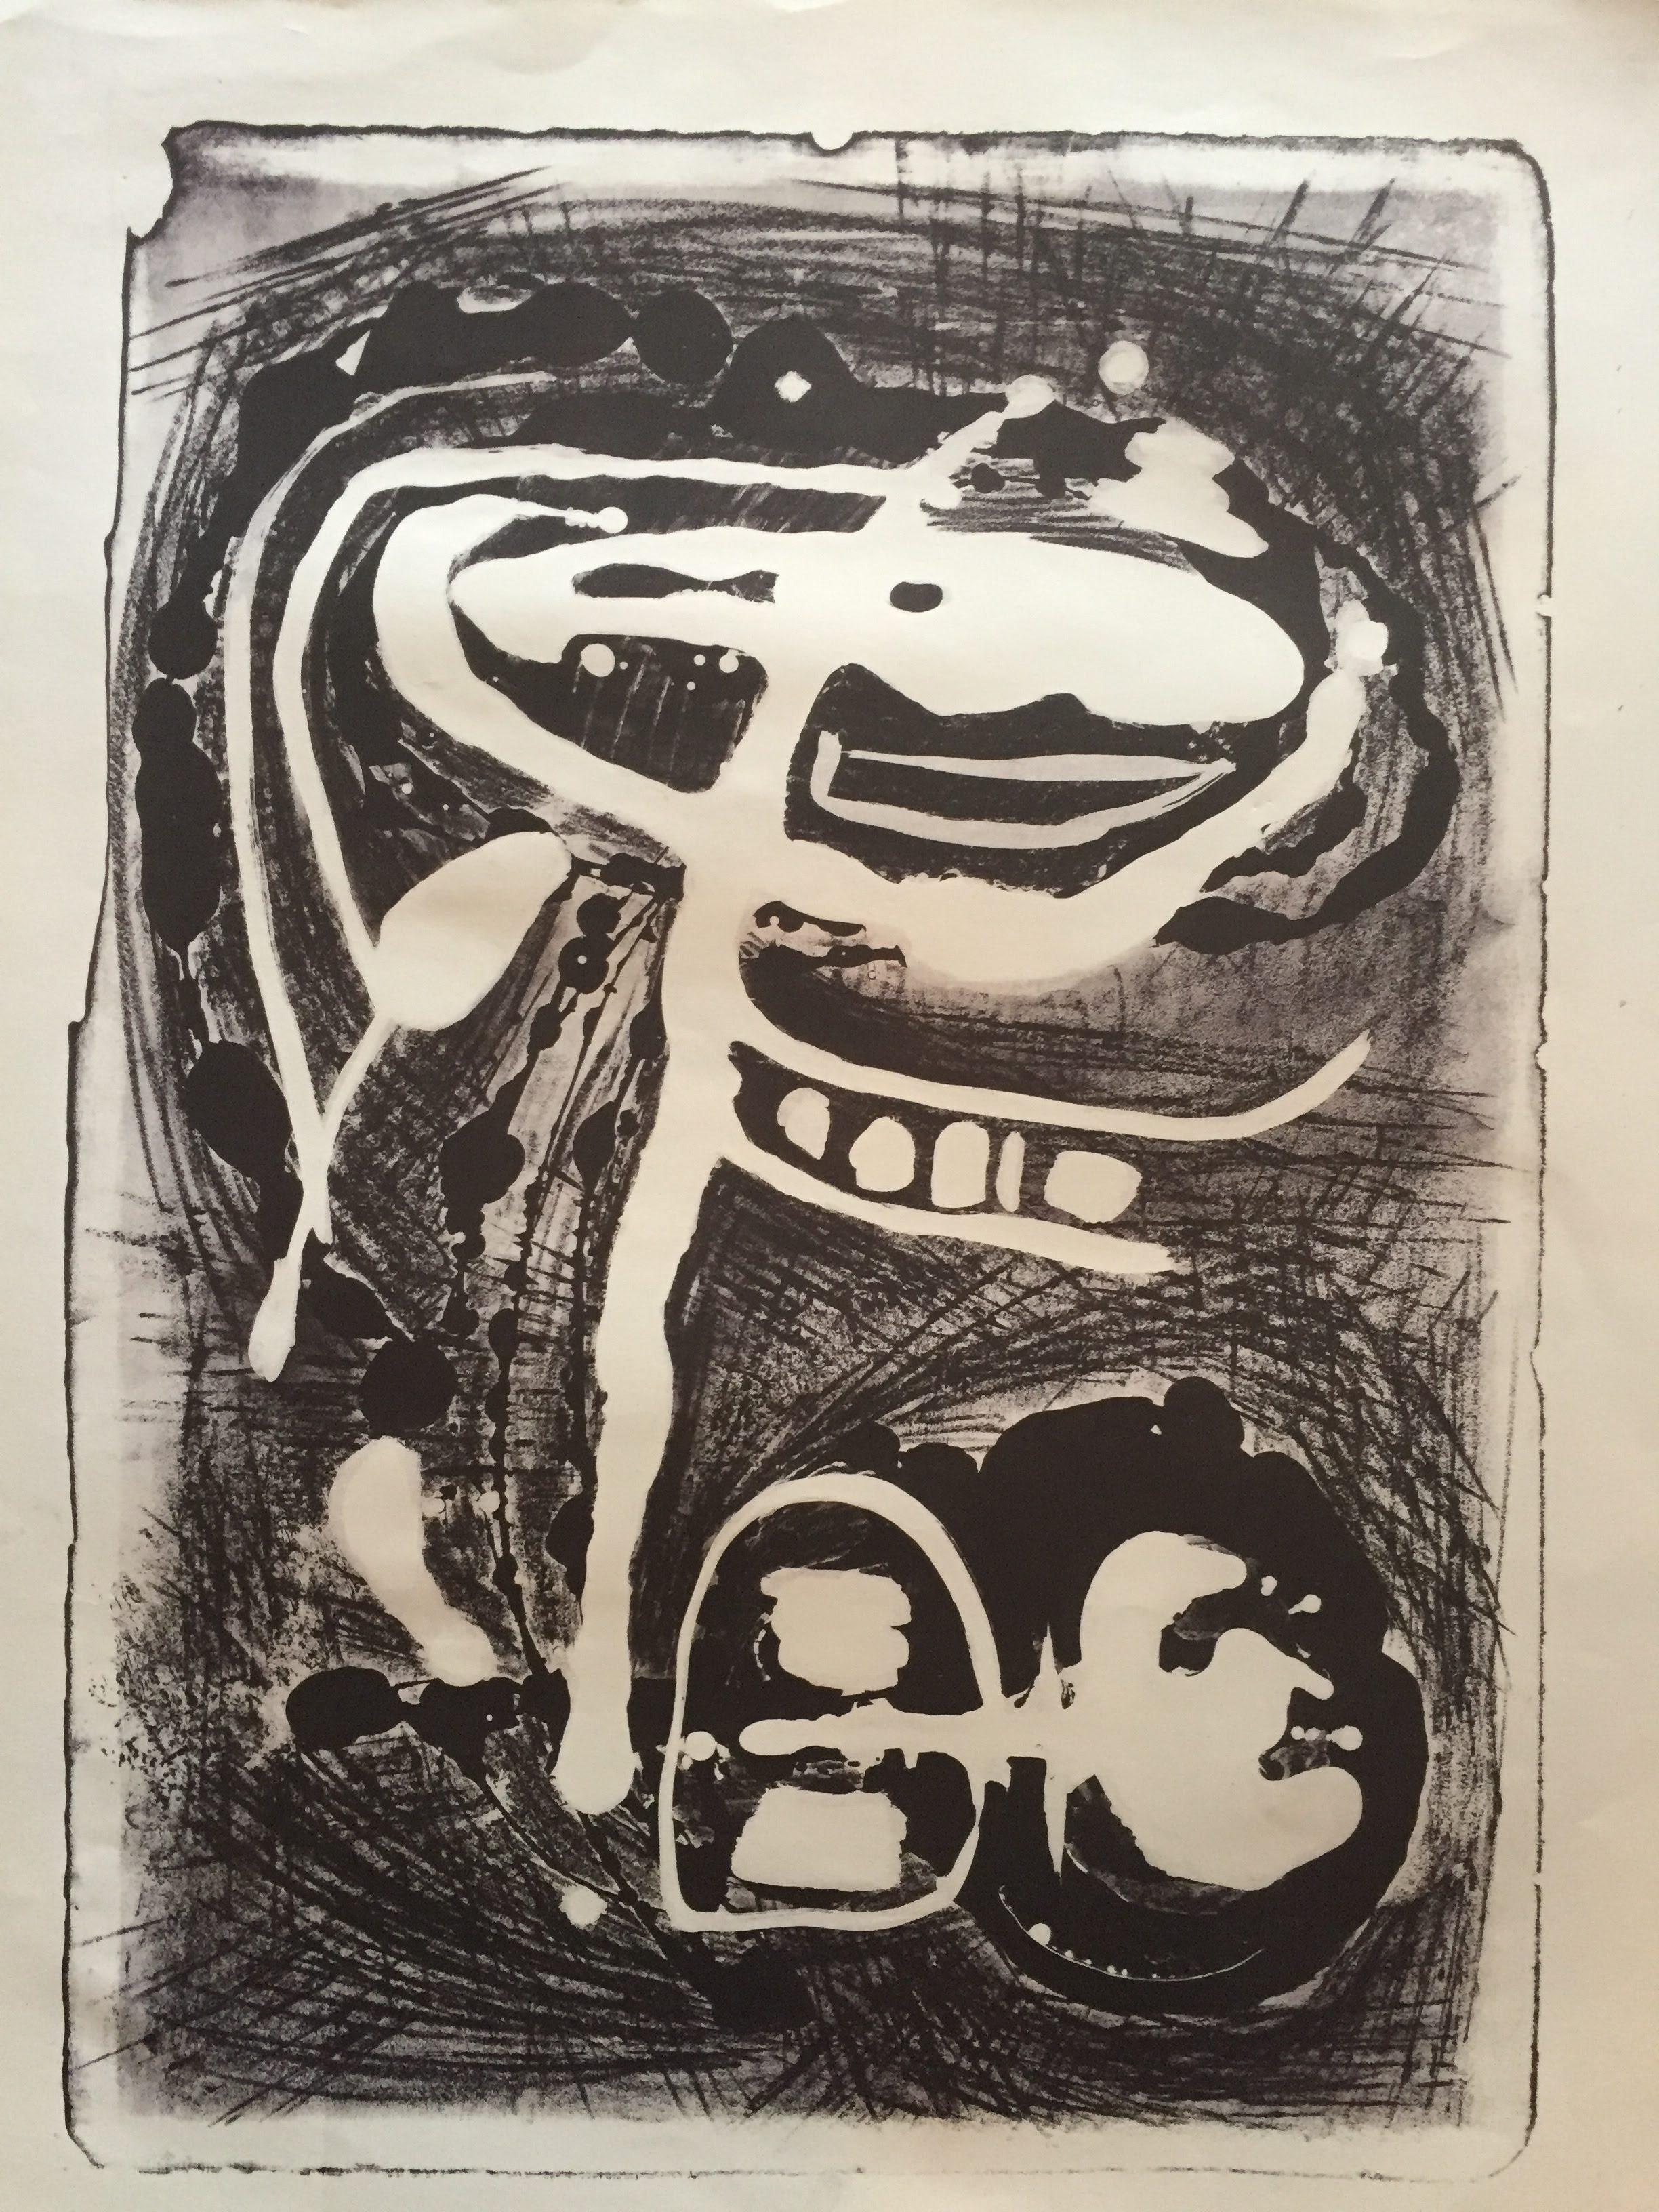 Jerry Opper Abstract Print - Abstract Stone Lithograph 1950s San Francisco Black and White Original Art